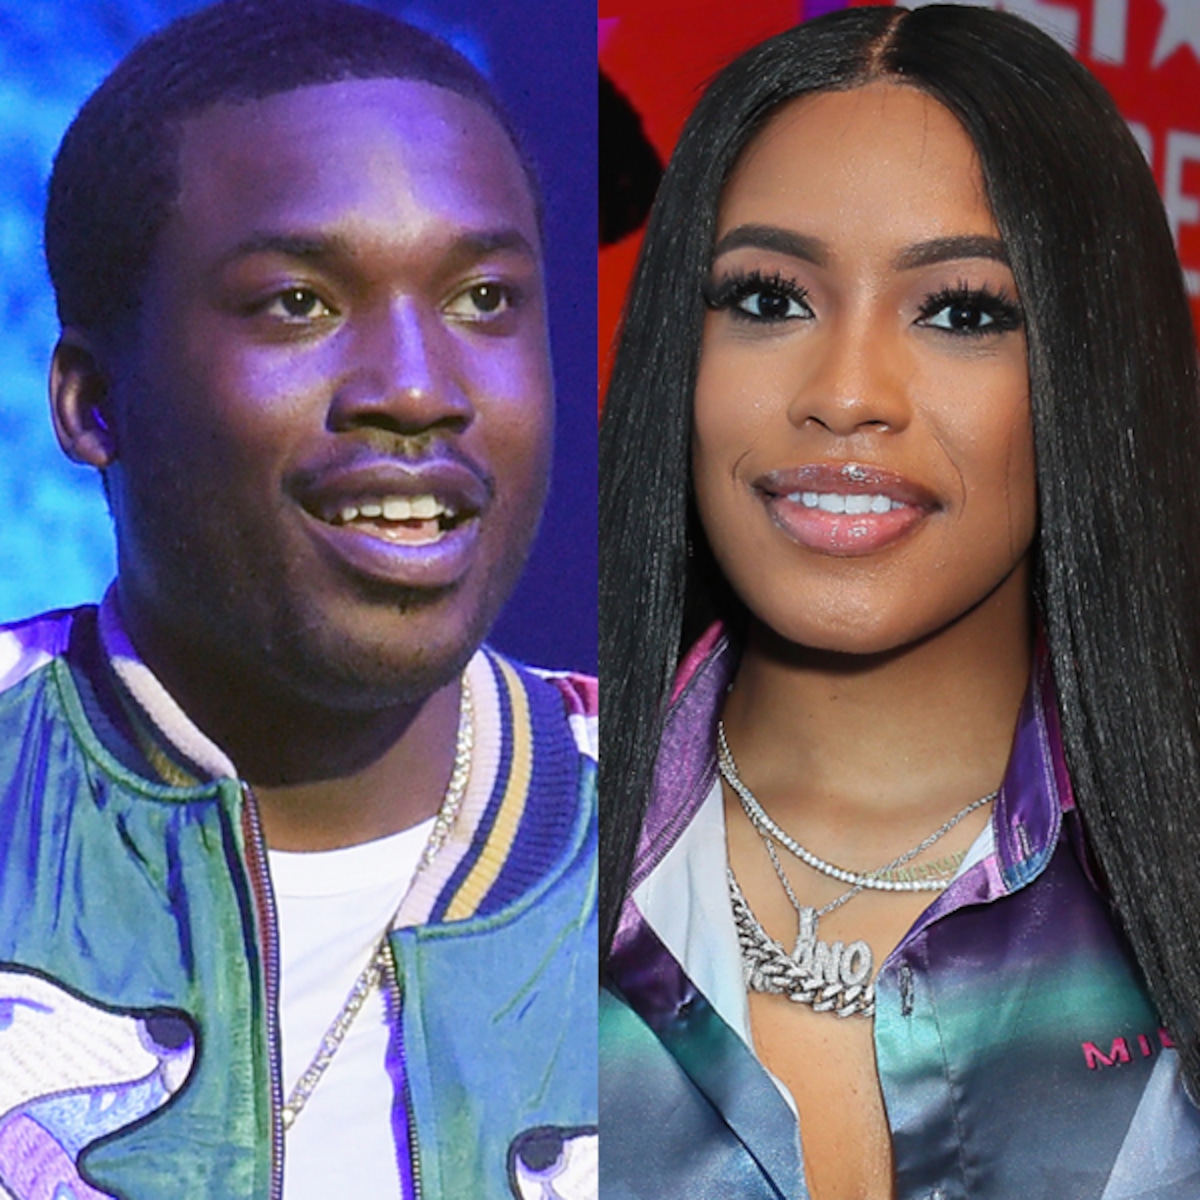 Meek Mill Says BET Awards 'Embarrassed' His Baby Mother Milan